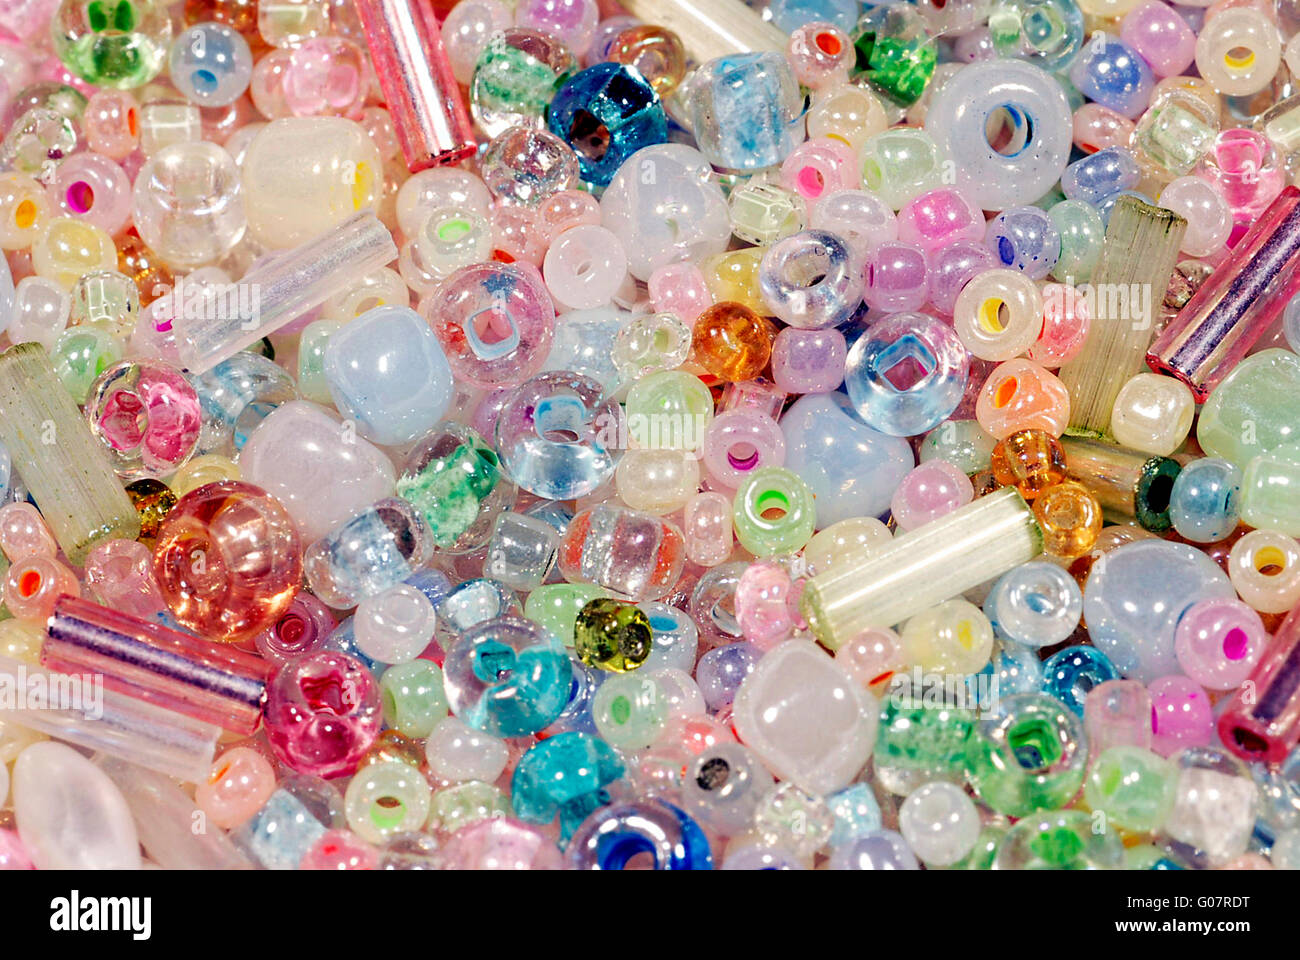 Colorful Beads Focus On Center Background Stock Photo